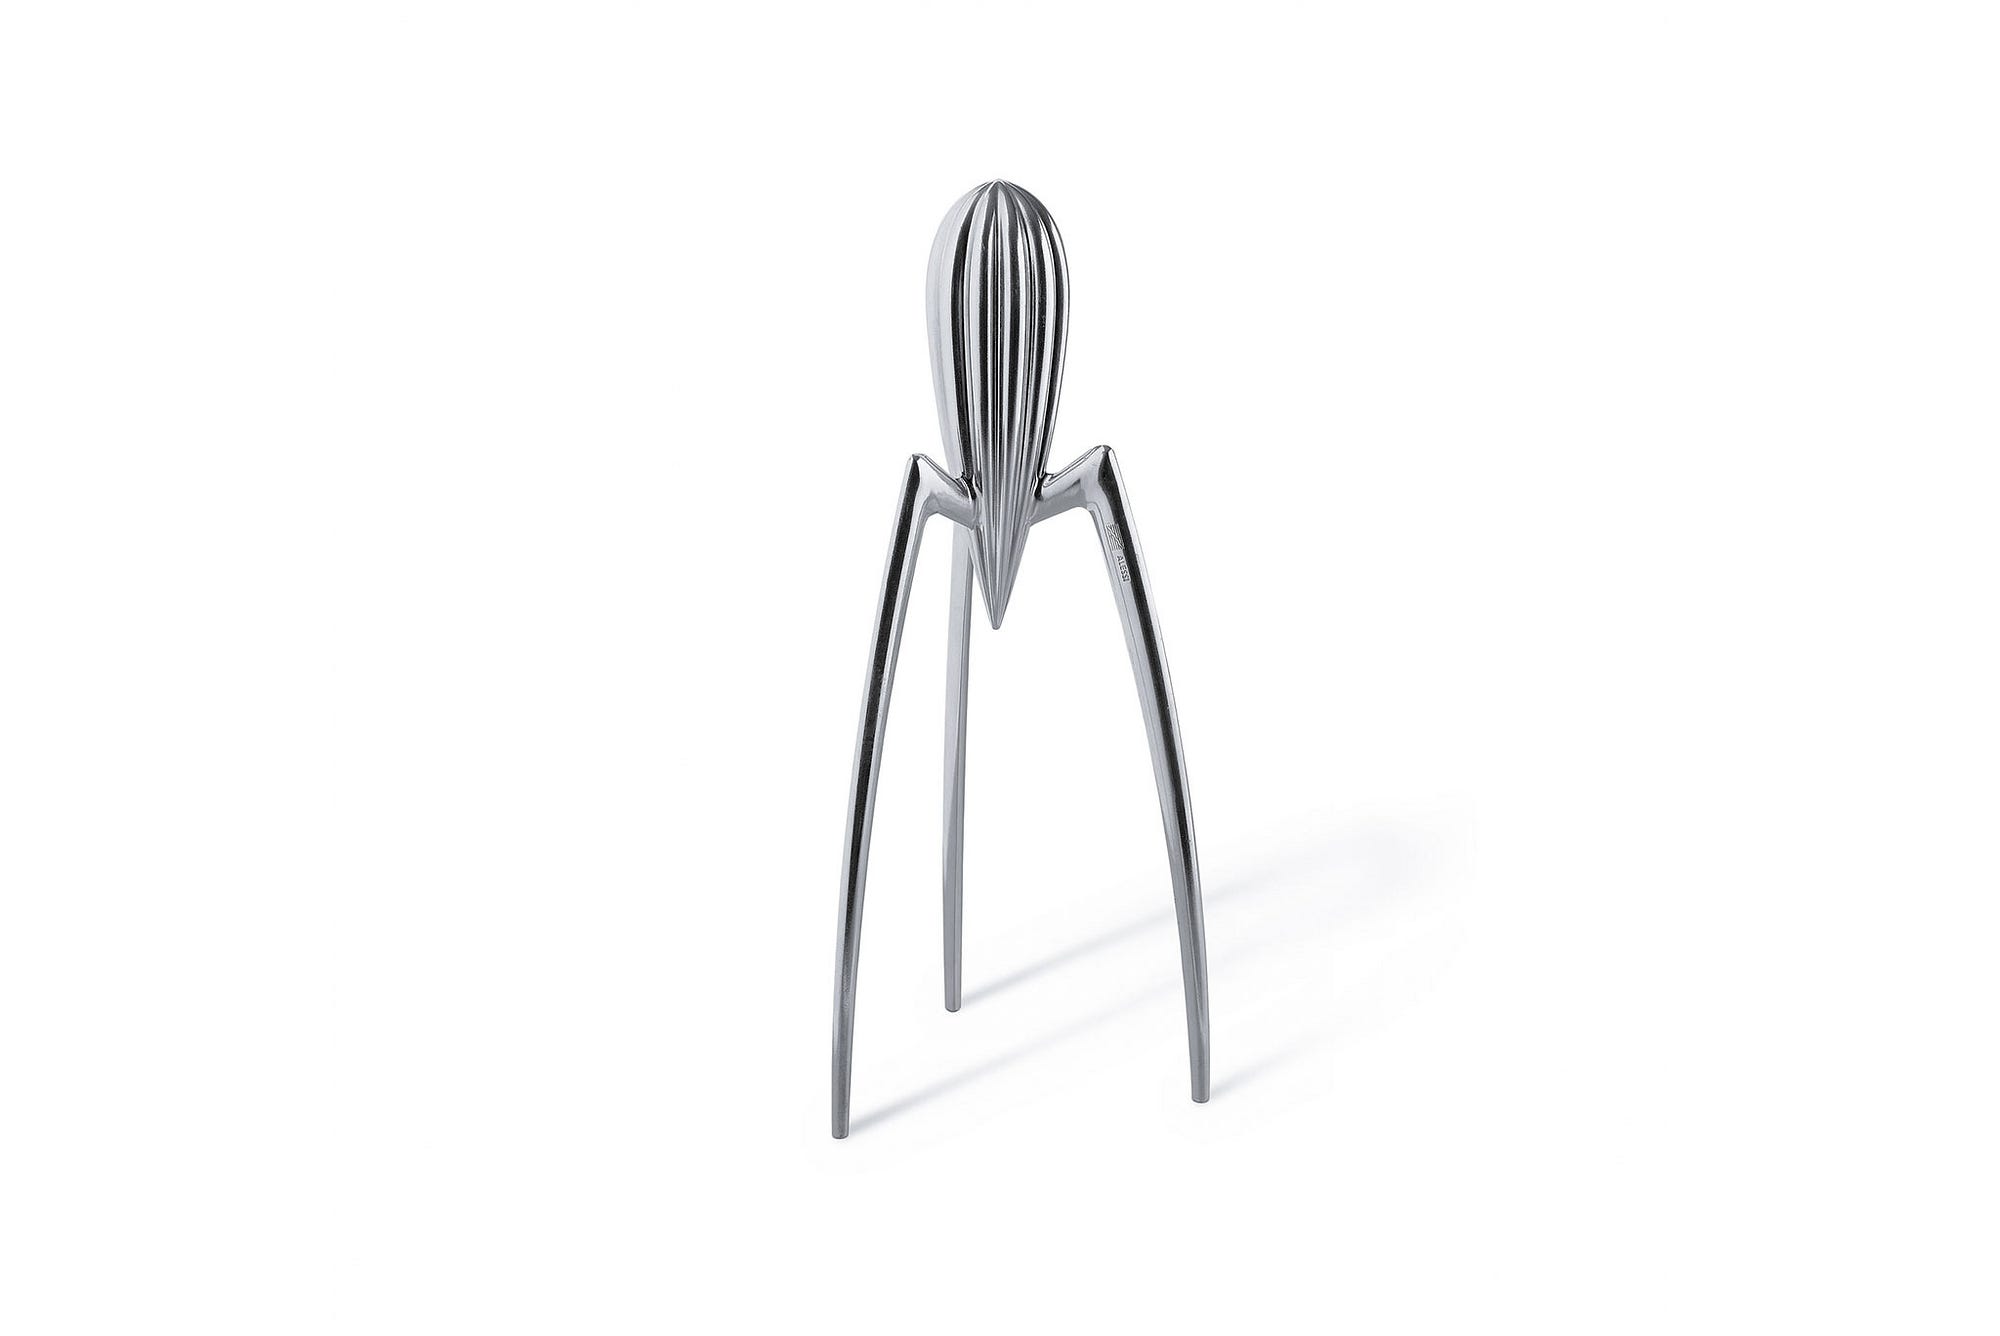 JUICY SALIF Philippe Starck Alessi limited edition gold